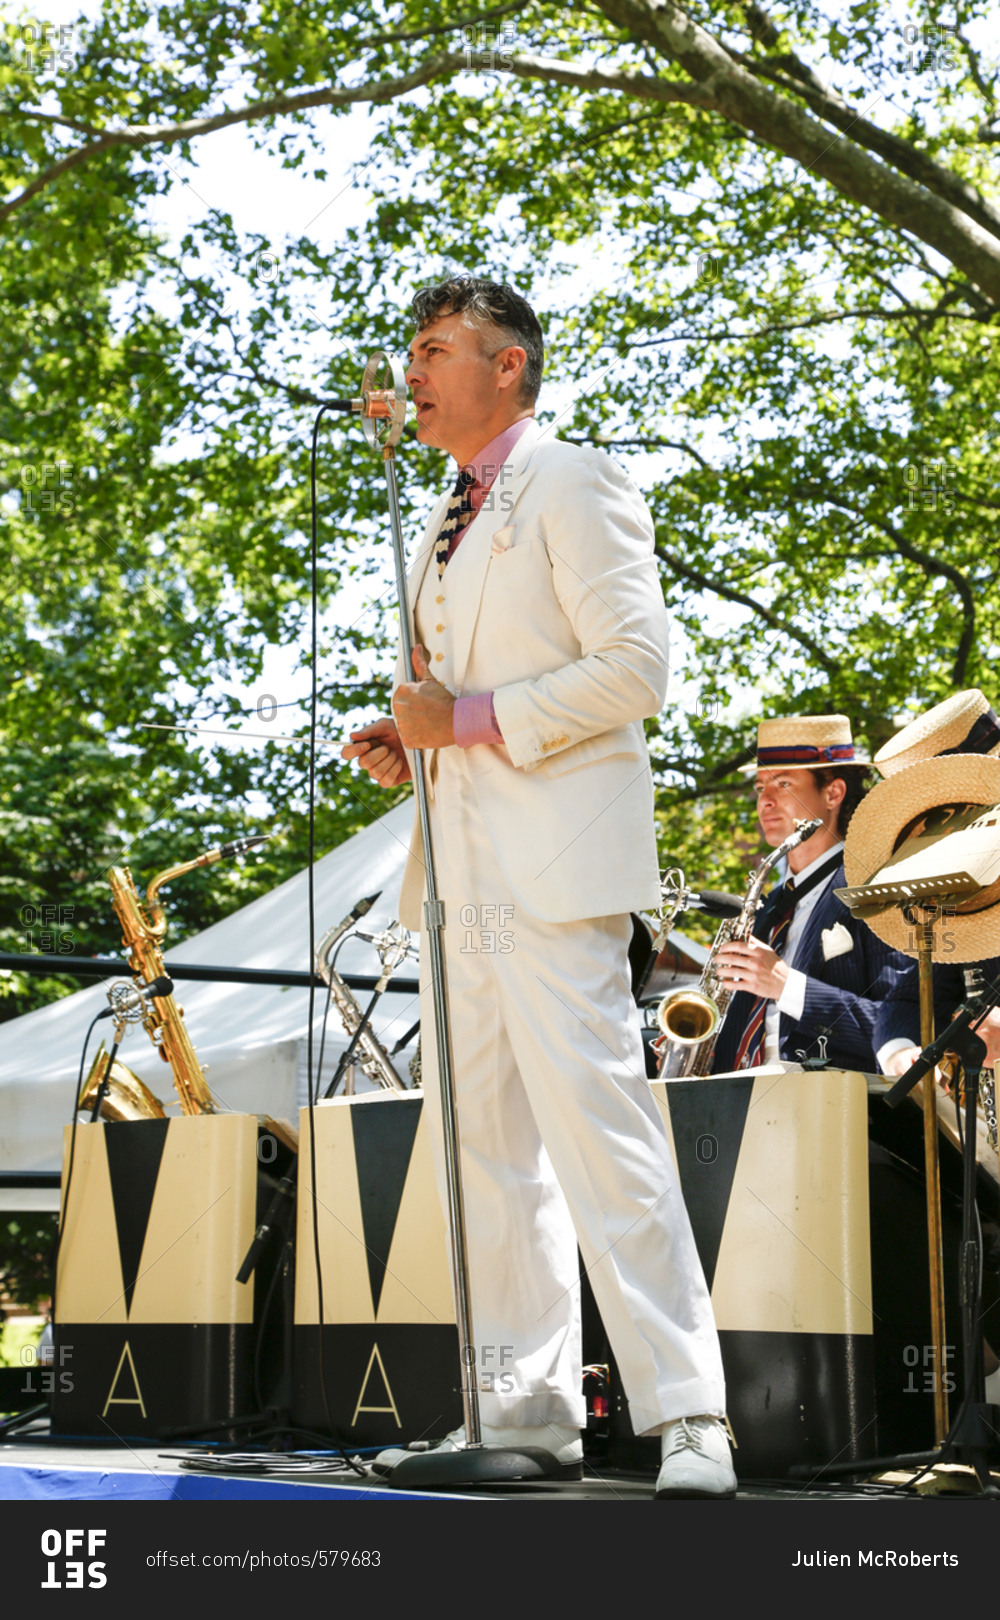 New York City, United States - June 10, 2017: 1920's Jazz
Age Lawn Party at Governors Island, Band leader singing into a
microphone at a garden party stock photo - OFFSET